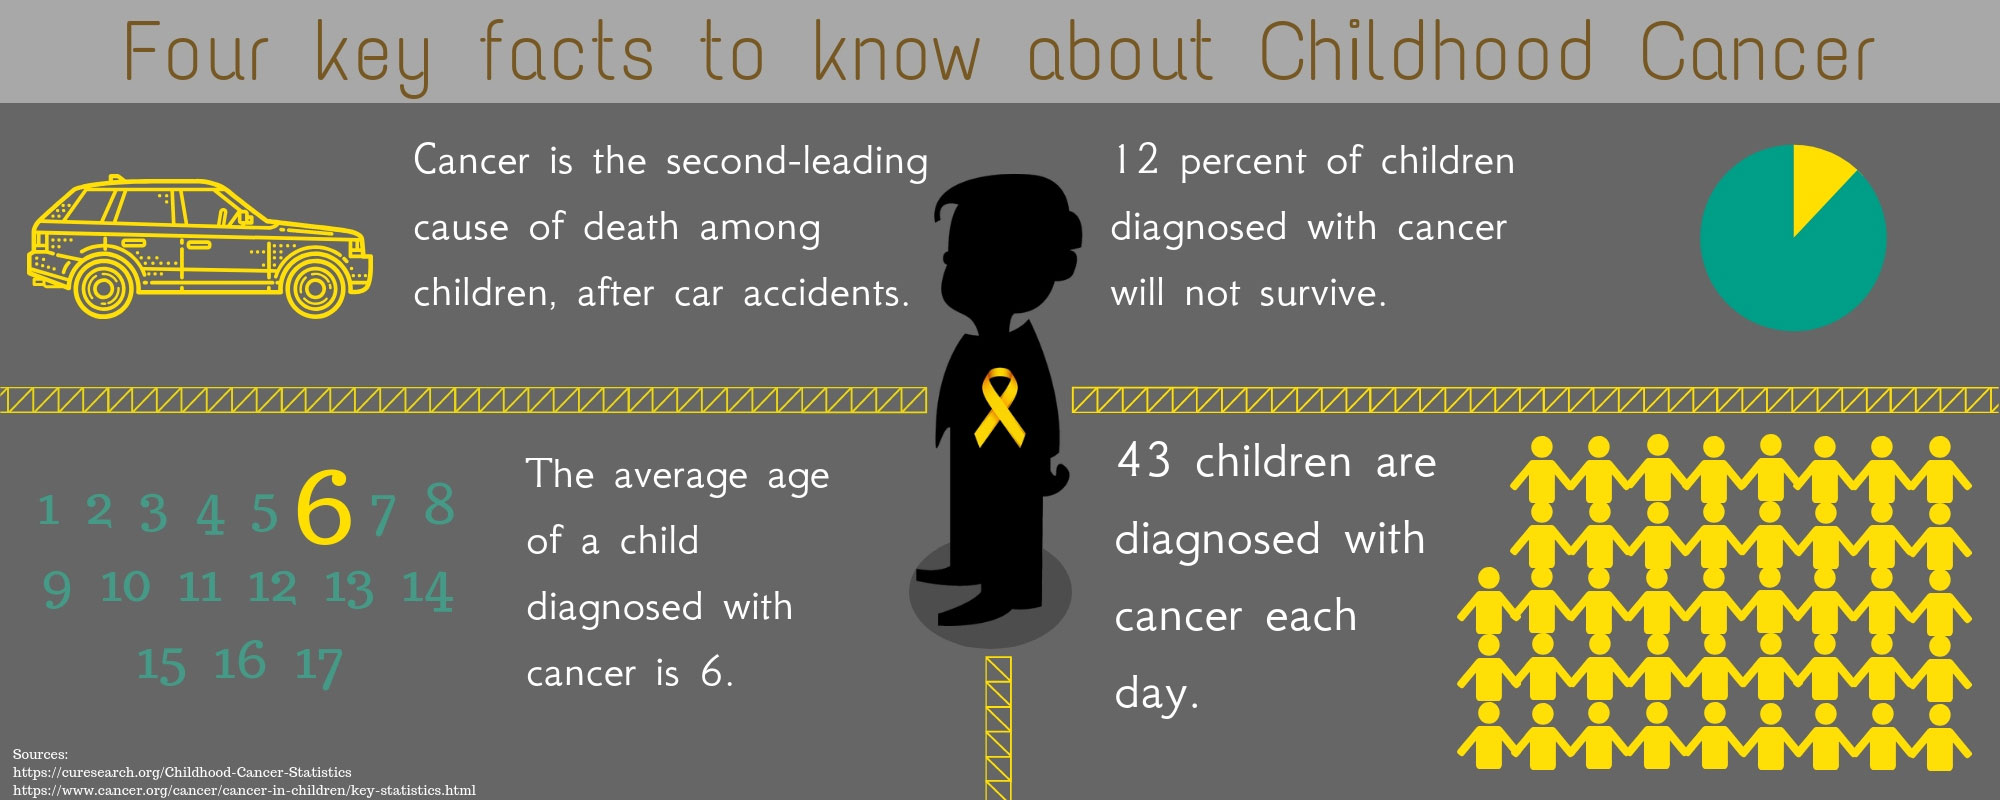 PHOTO: A graphic showing facts about childhood cancer.